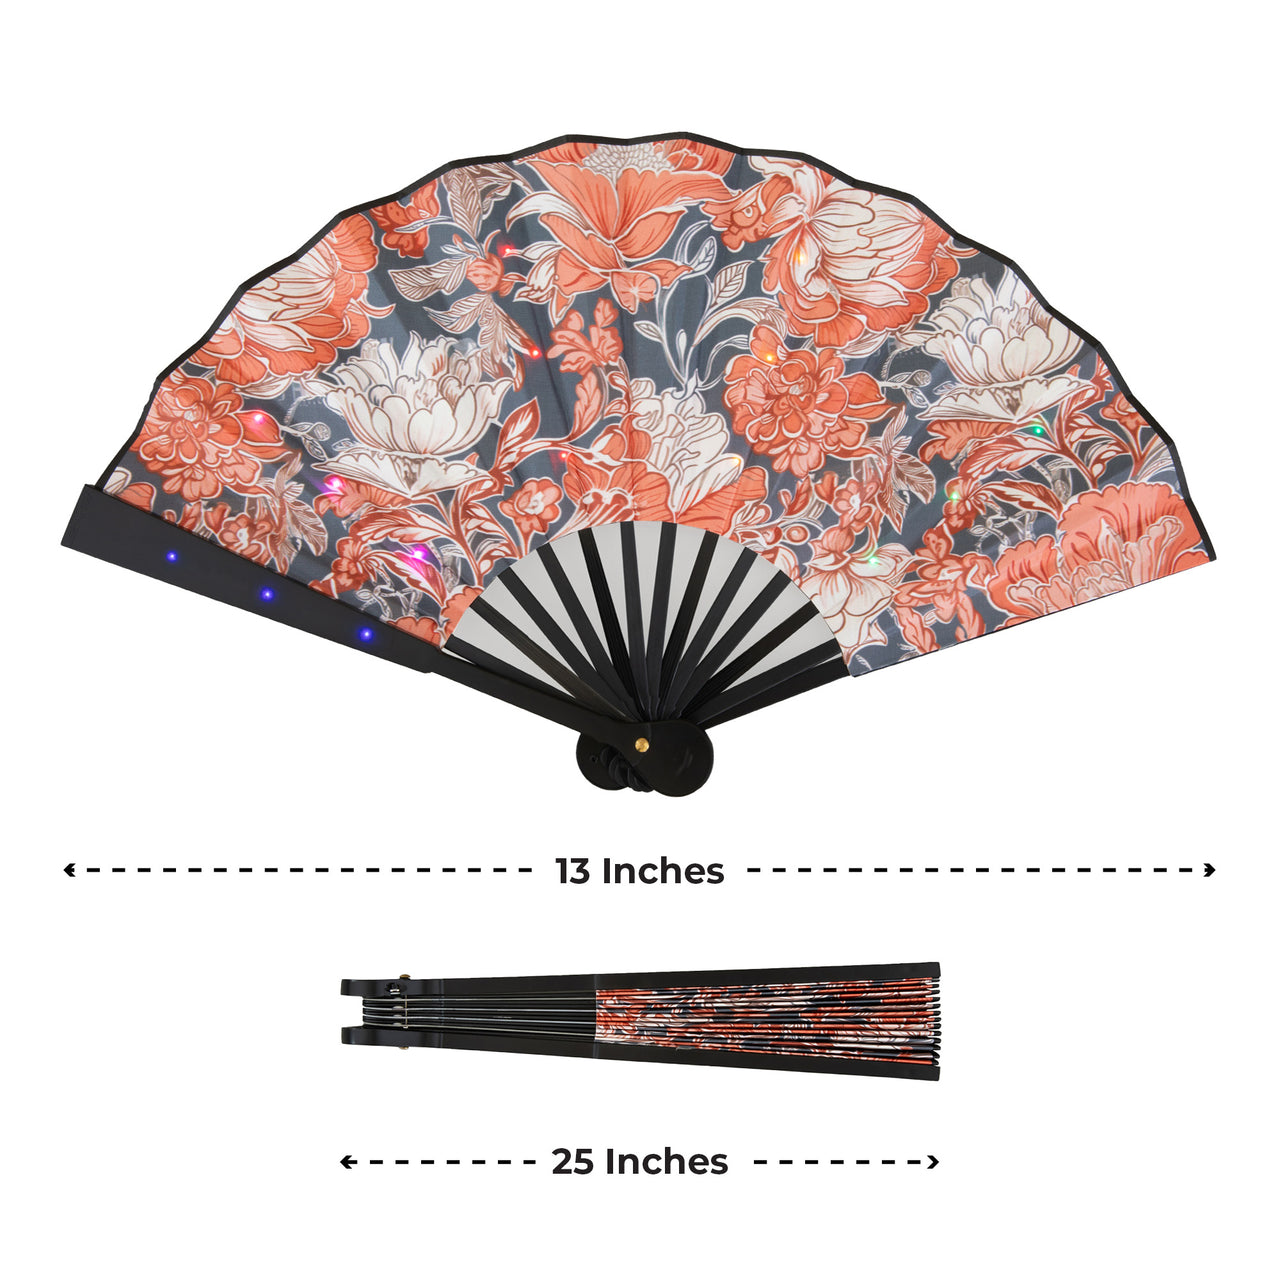 LED Hand Fan - "Floral" - Traditional Floral Design, Ready for EDM Heat